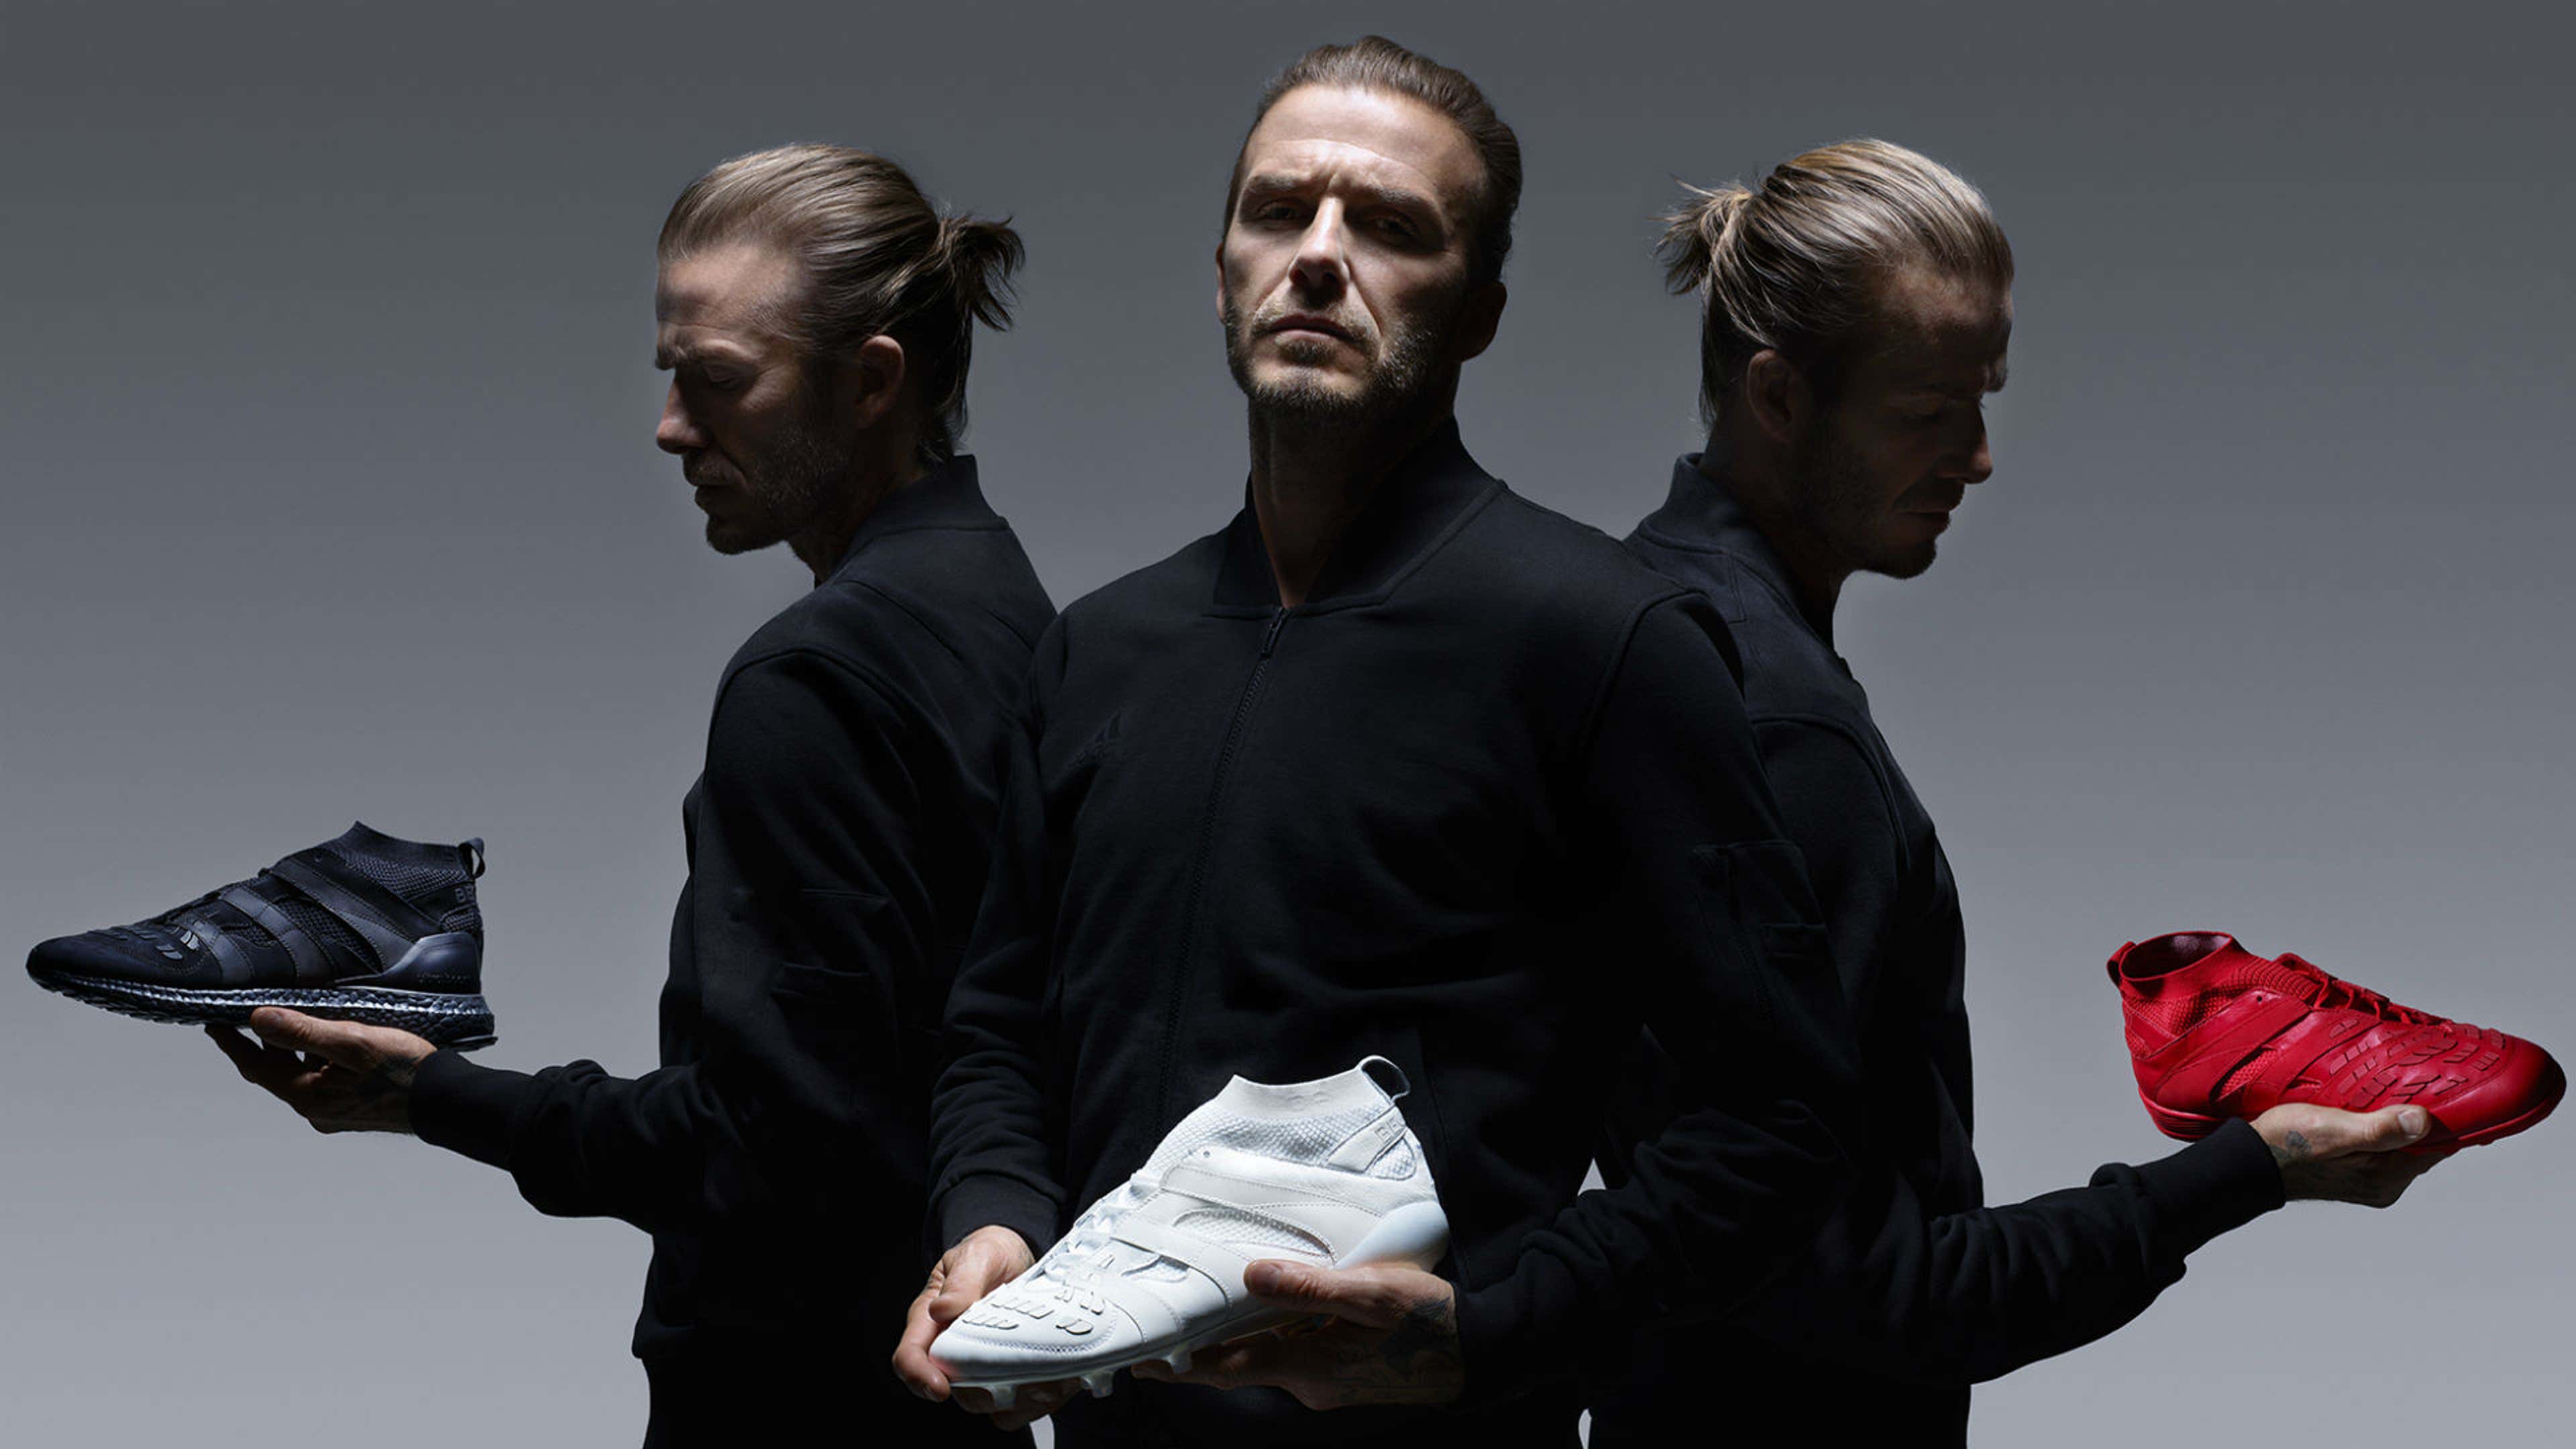 Adidas sign up David Beckham to promote new climacool Revolution shoes